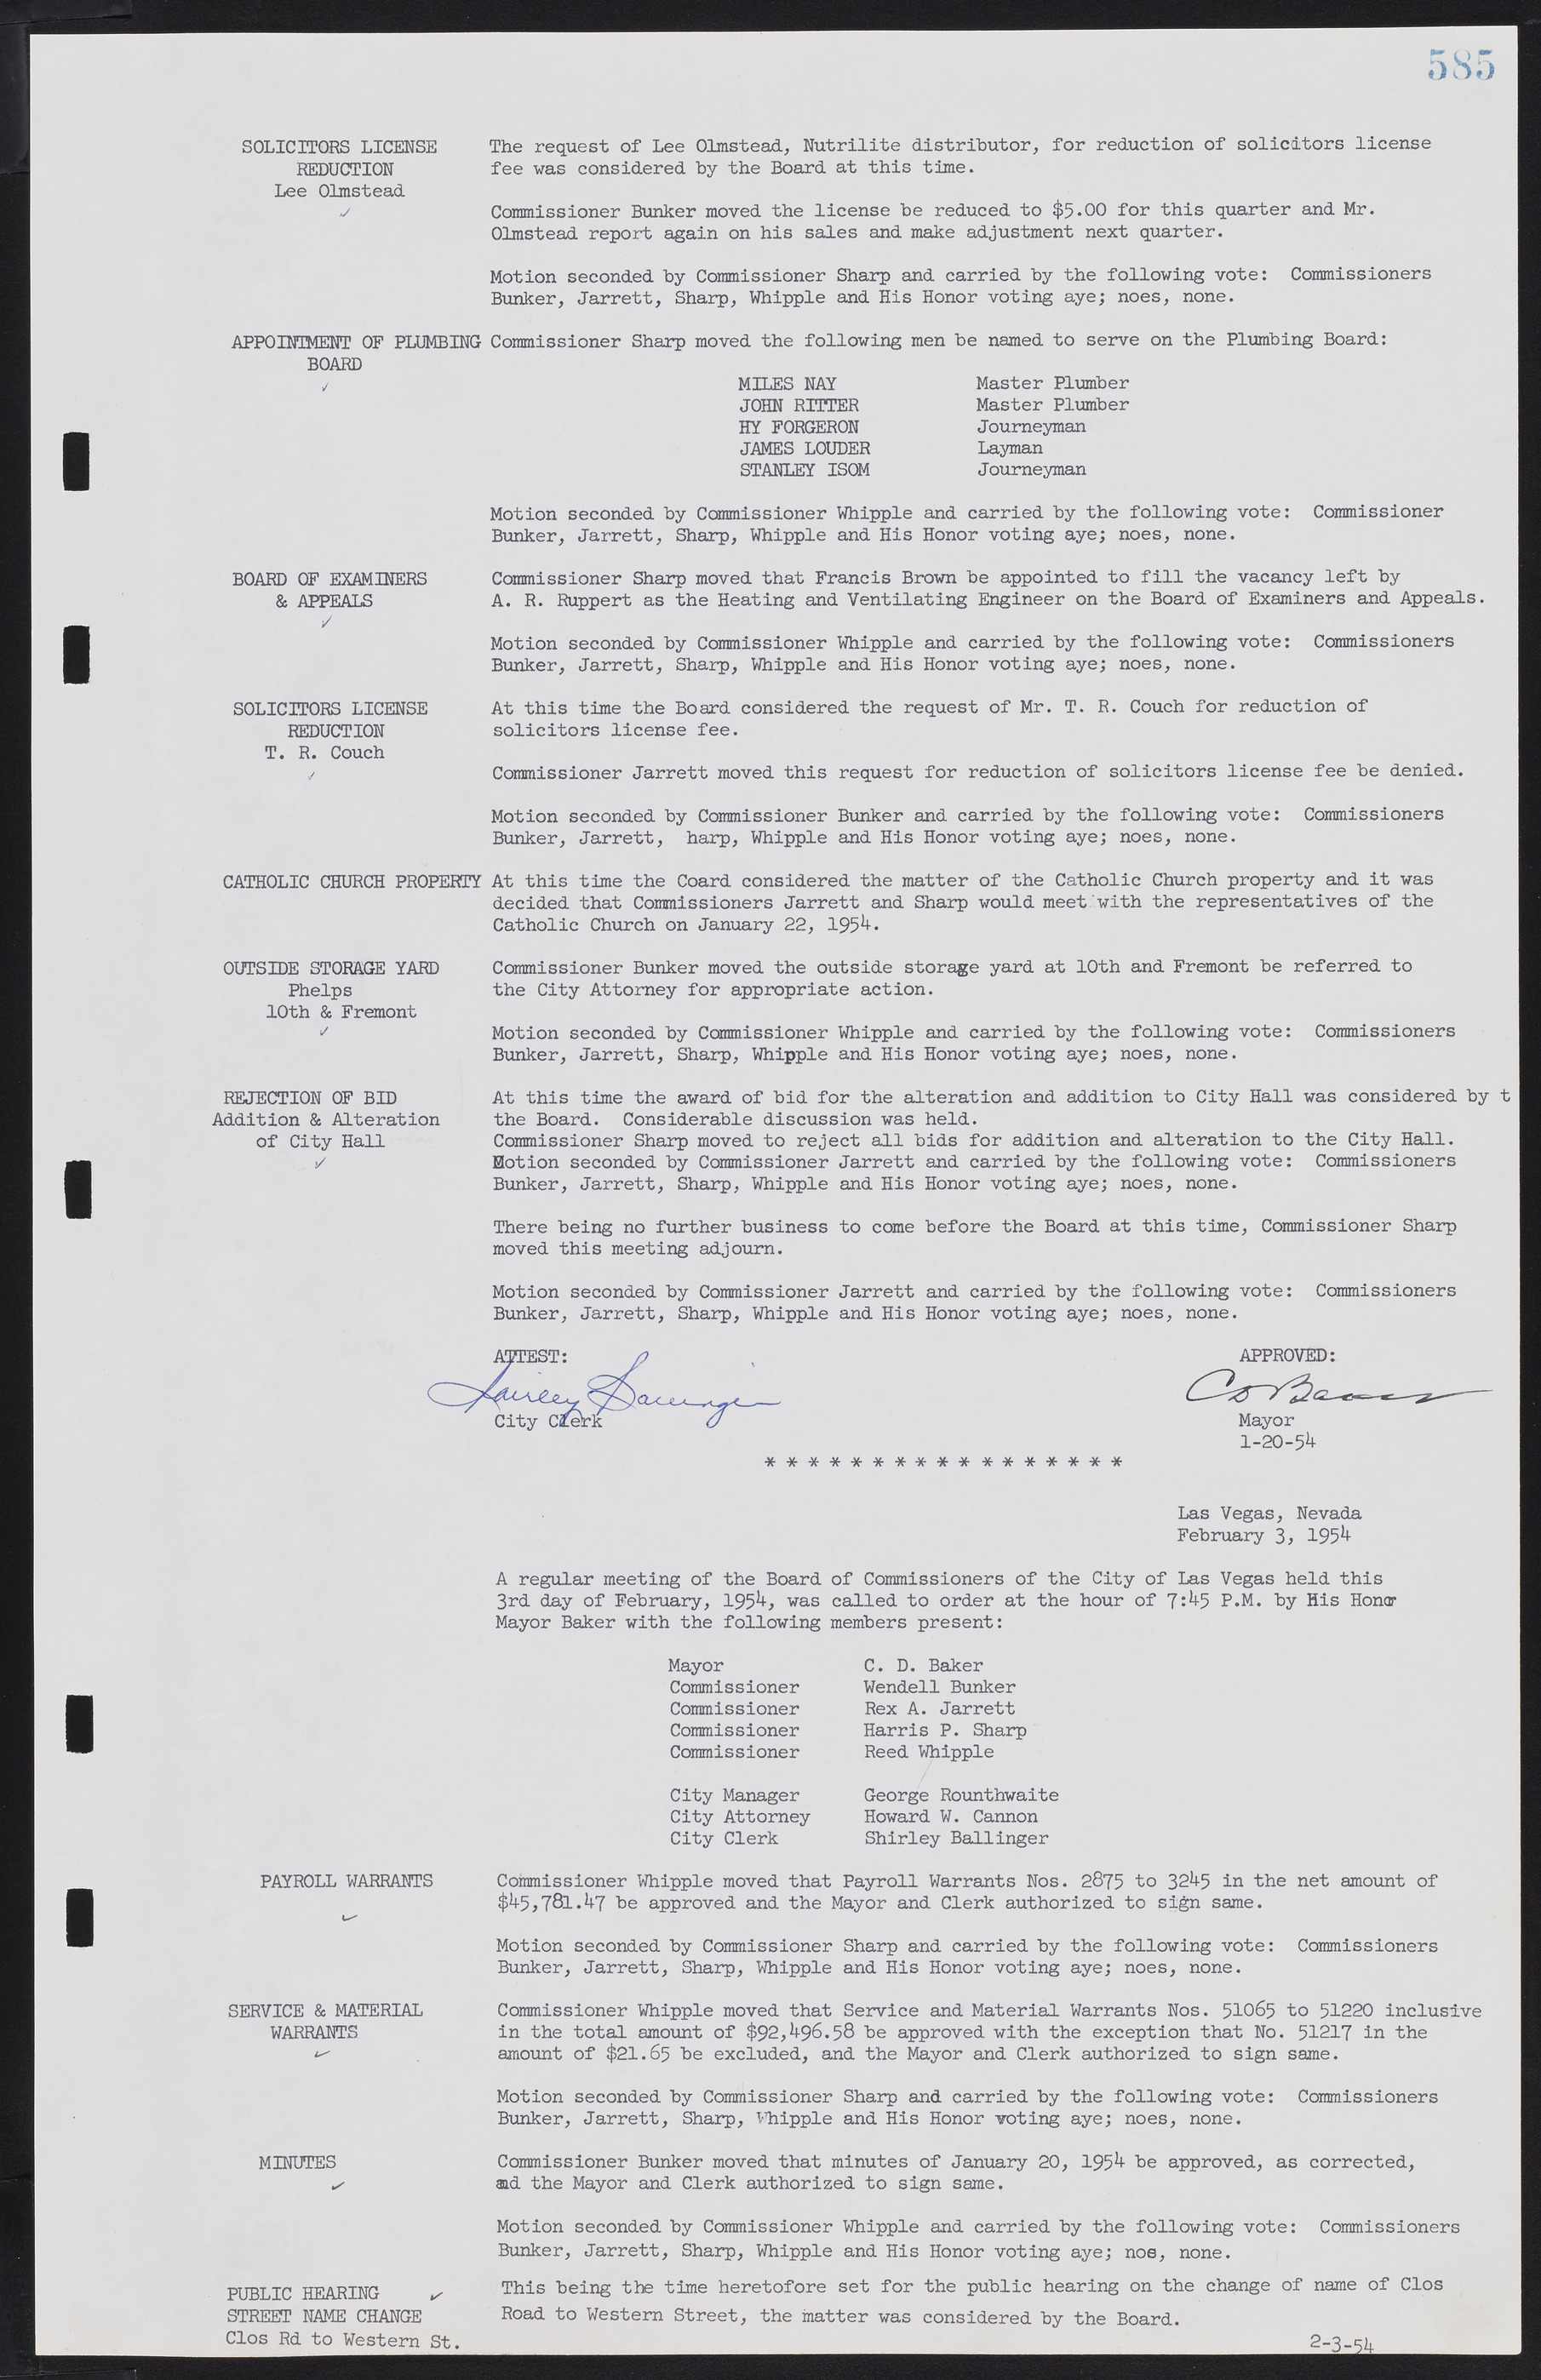 Las Vegas City Commission Minutes, May 26, 1952 to February 17, 1954, lvc000008-615